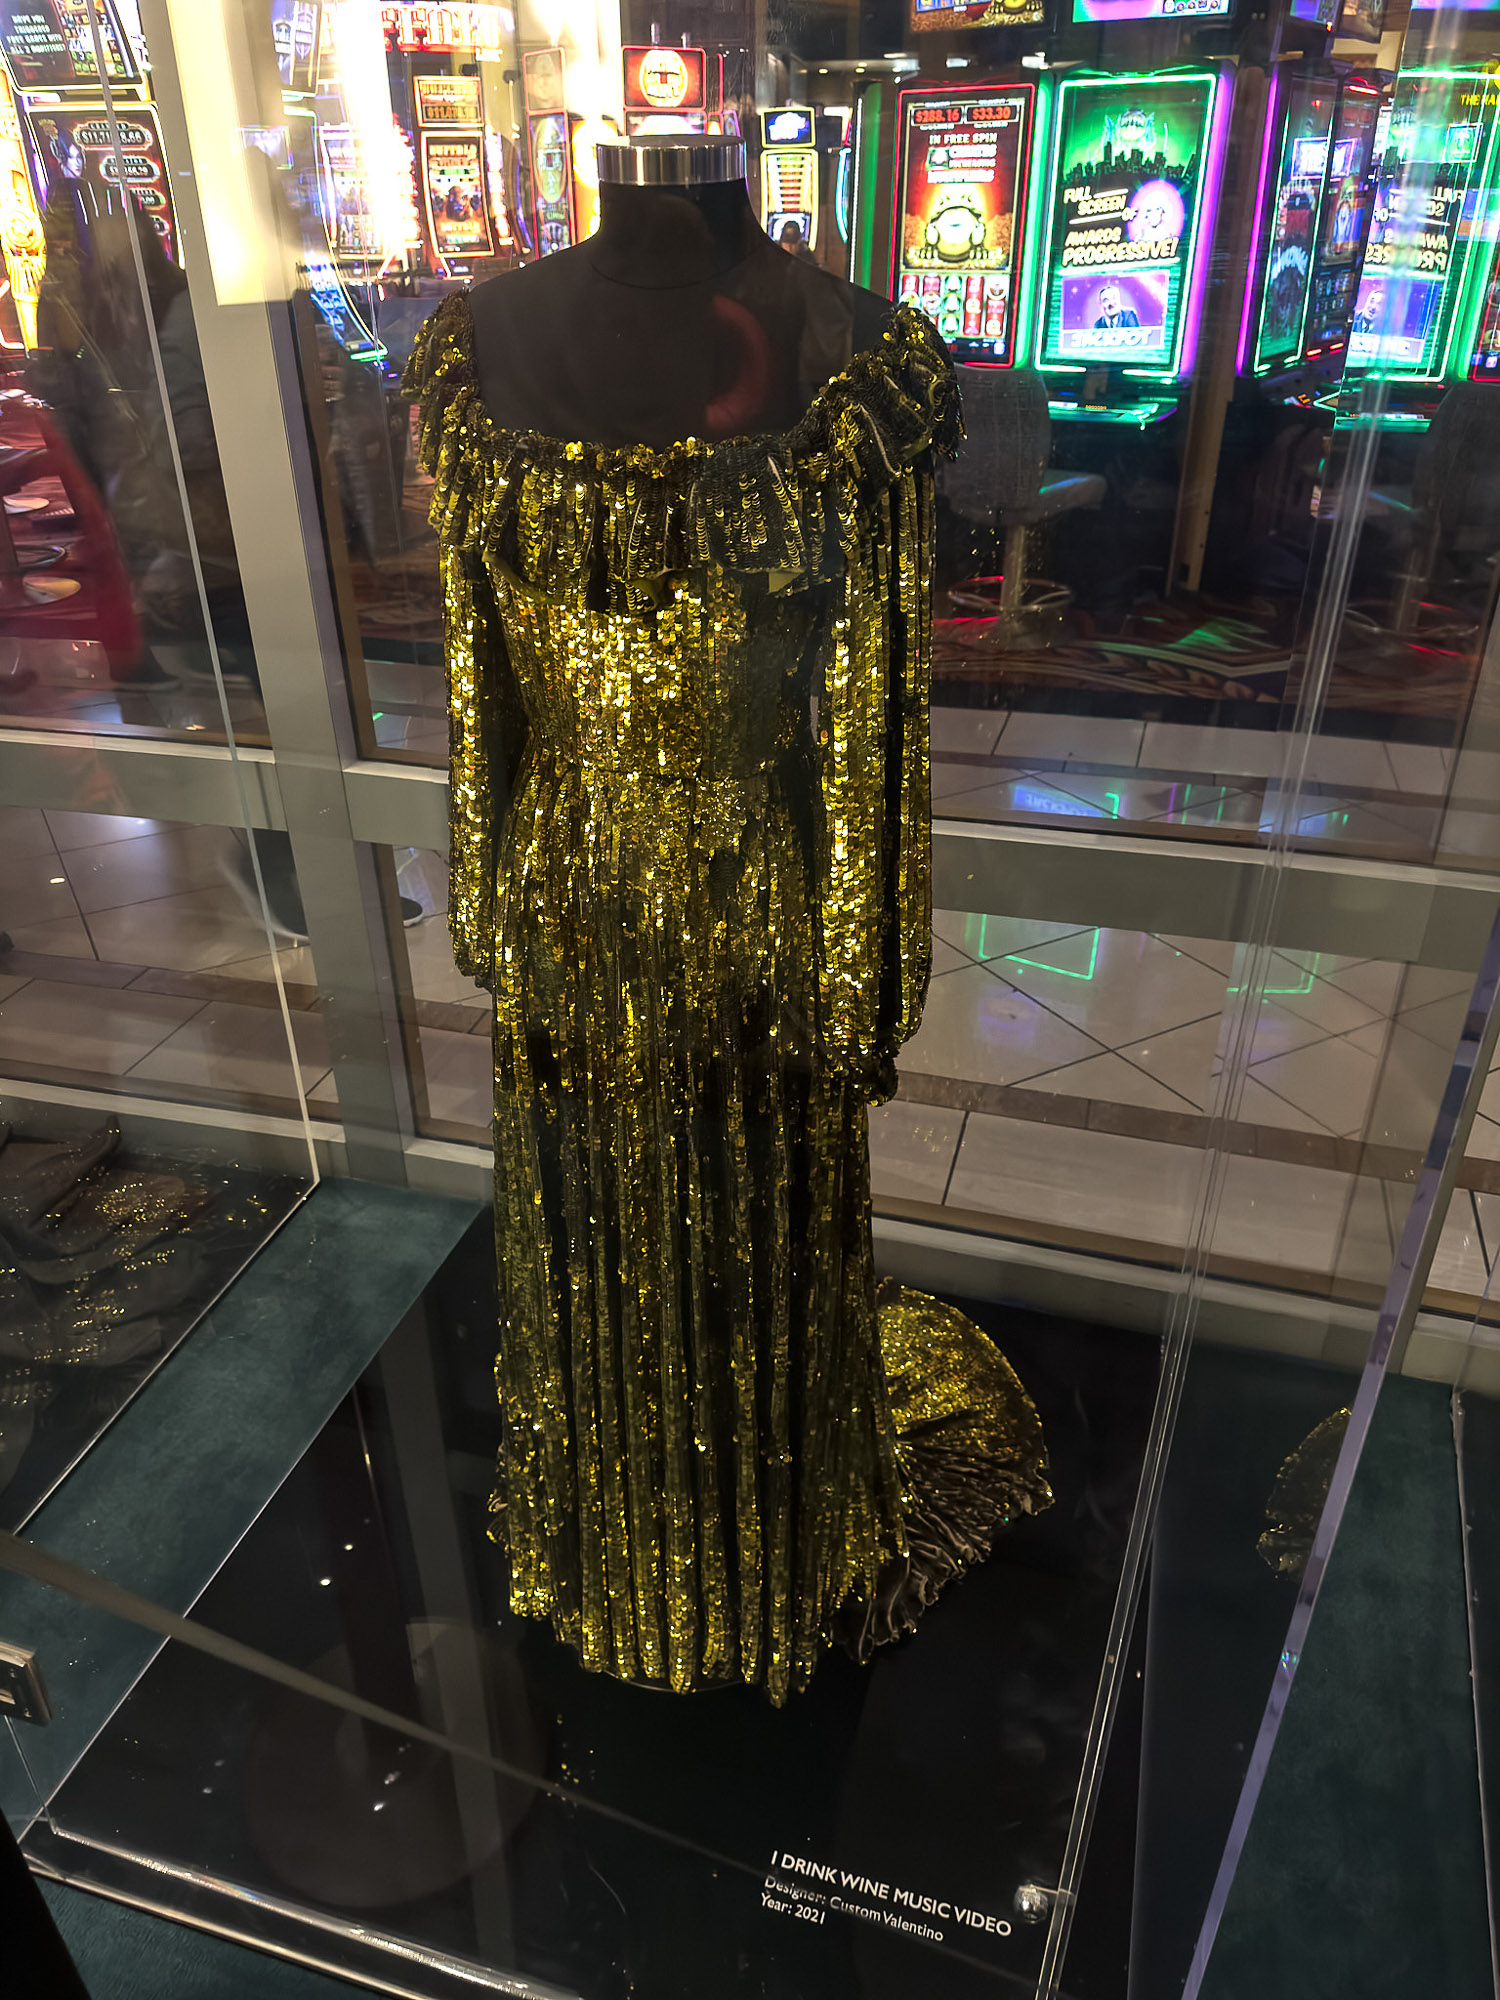 Gold Sequin Dress from Adele's I Drink Wine Music Video on Display in Caesars Palace.